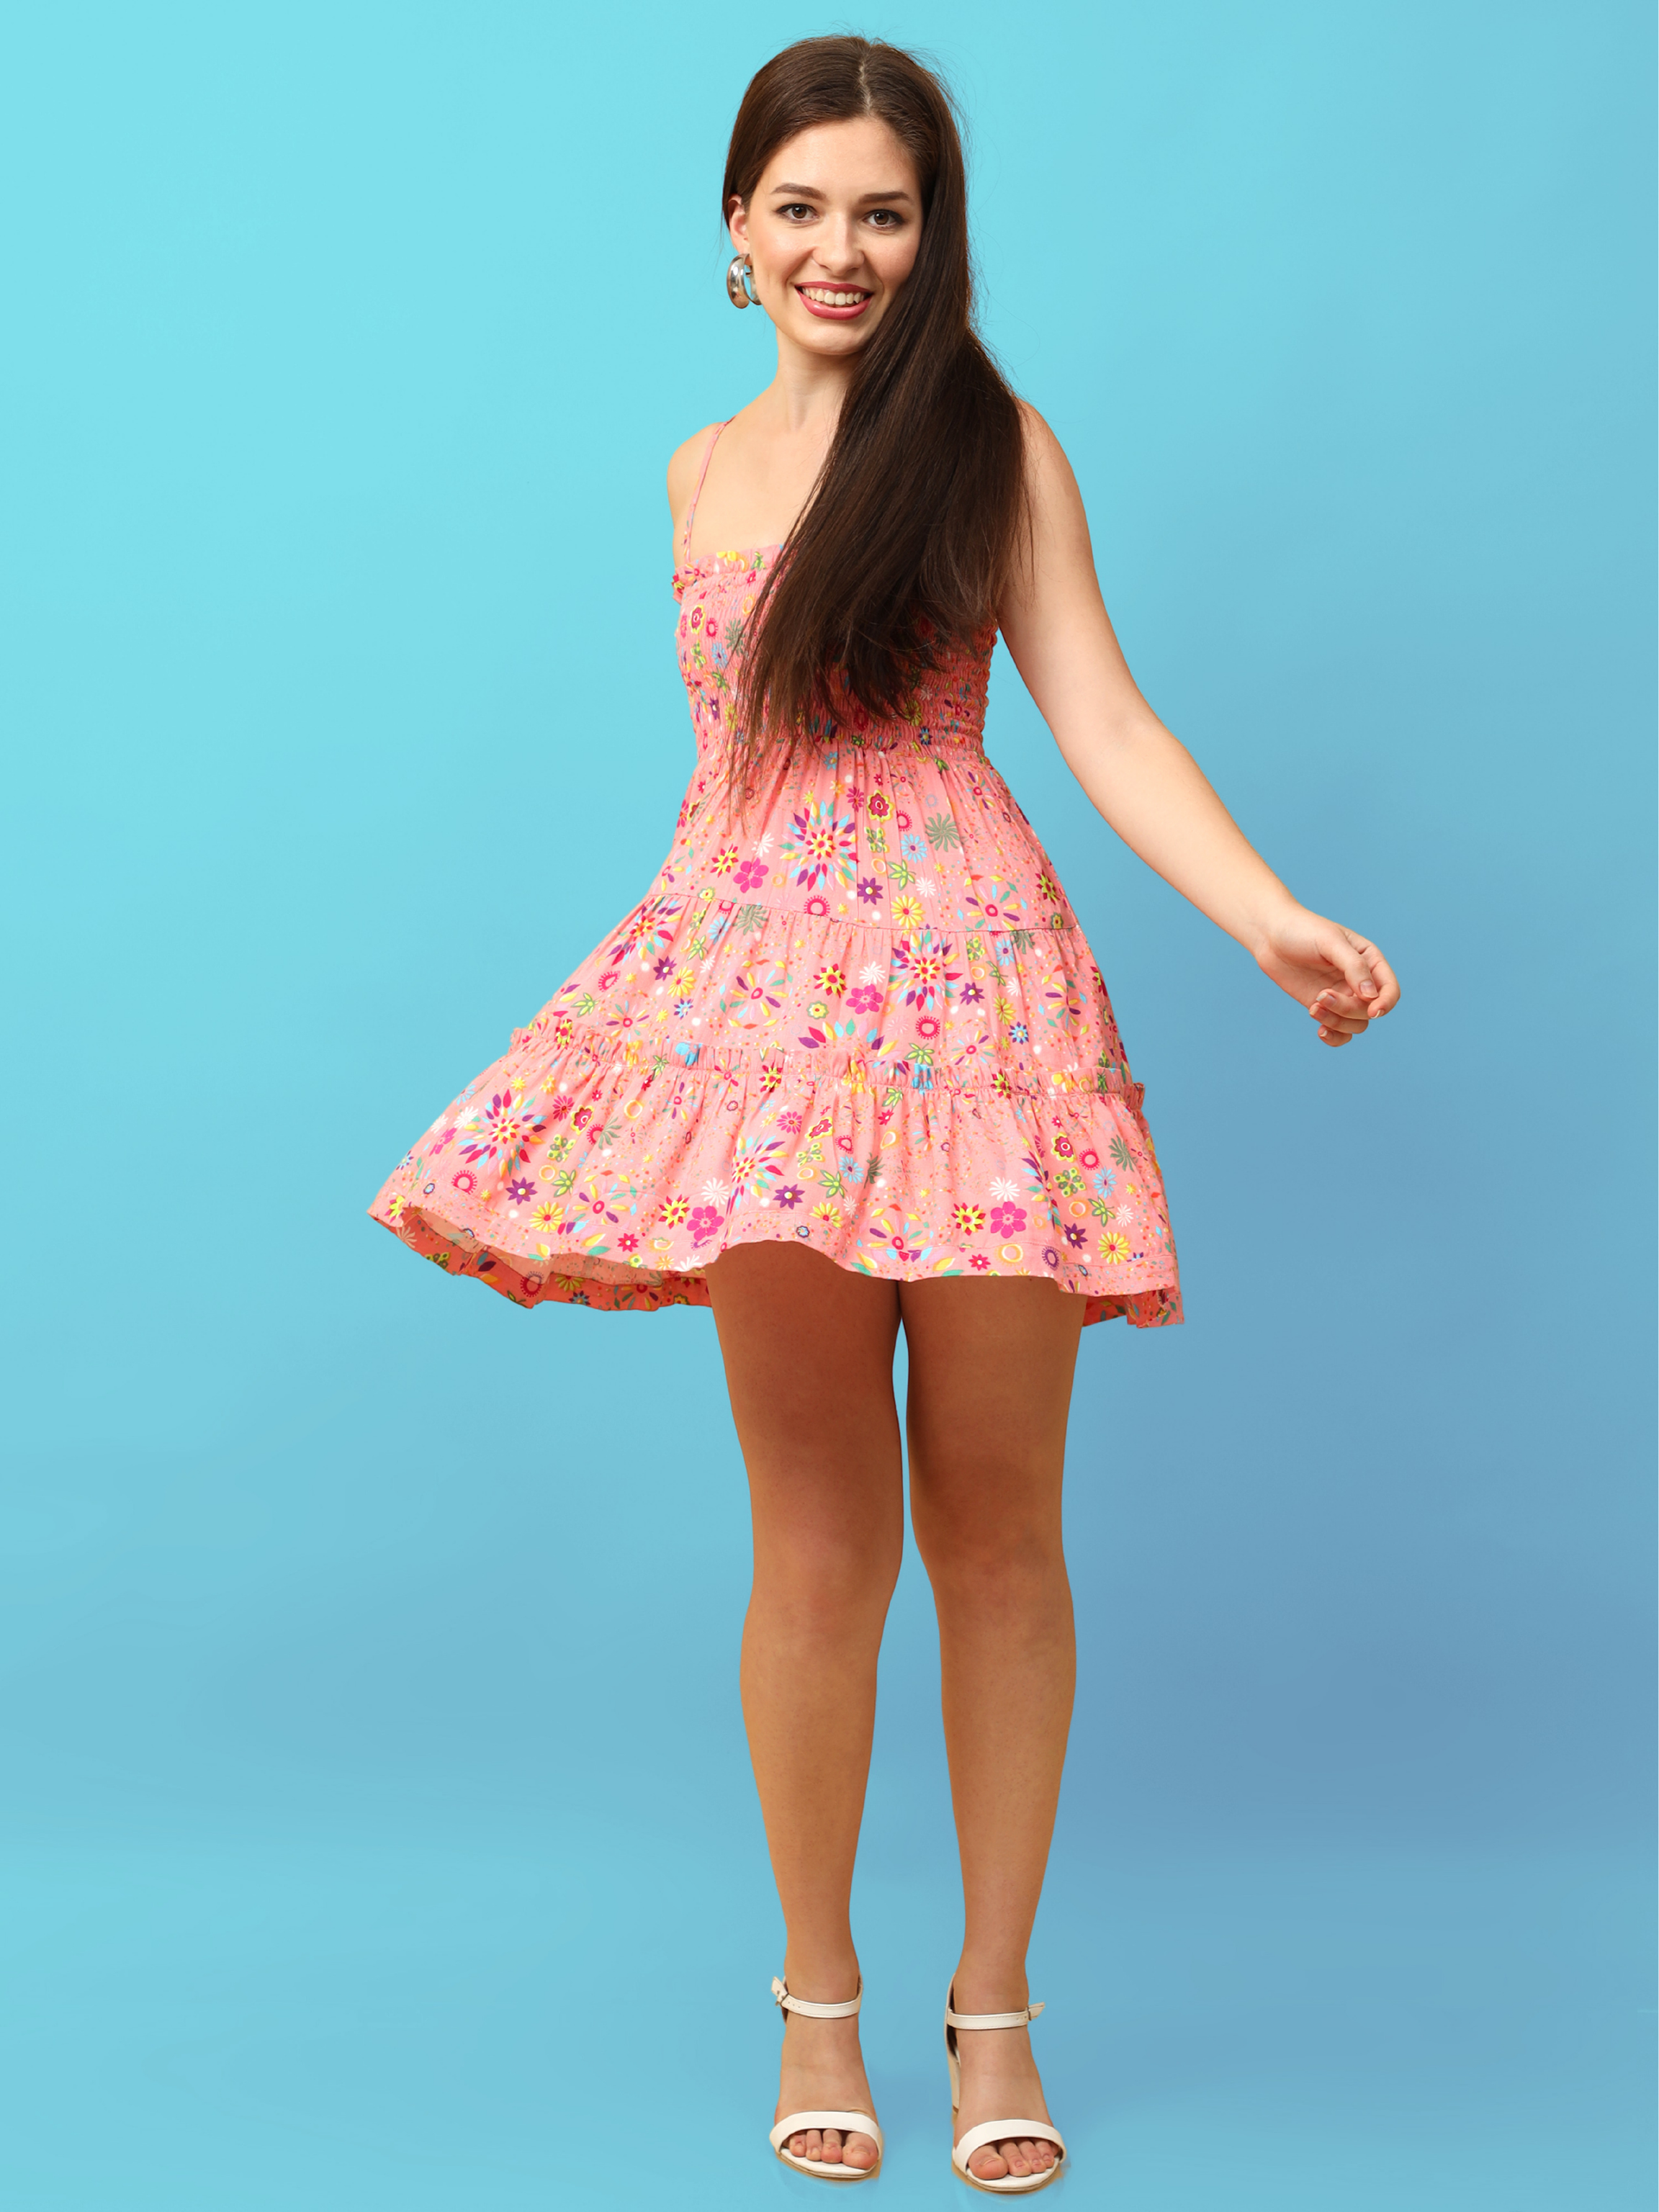 Sweet16 - Women's Tiered Fit and Flare Dress